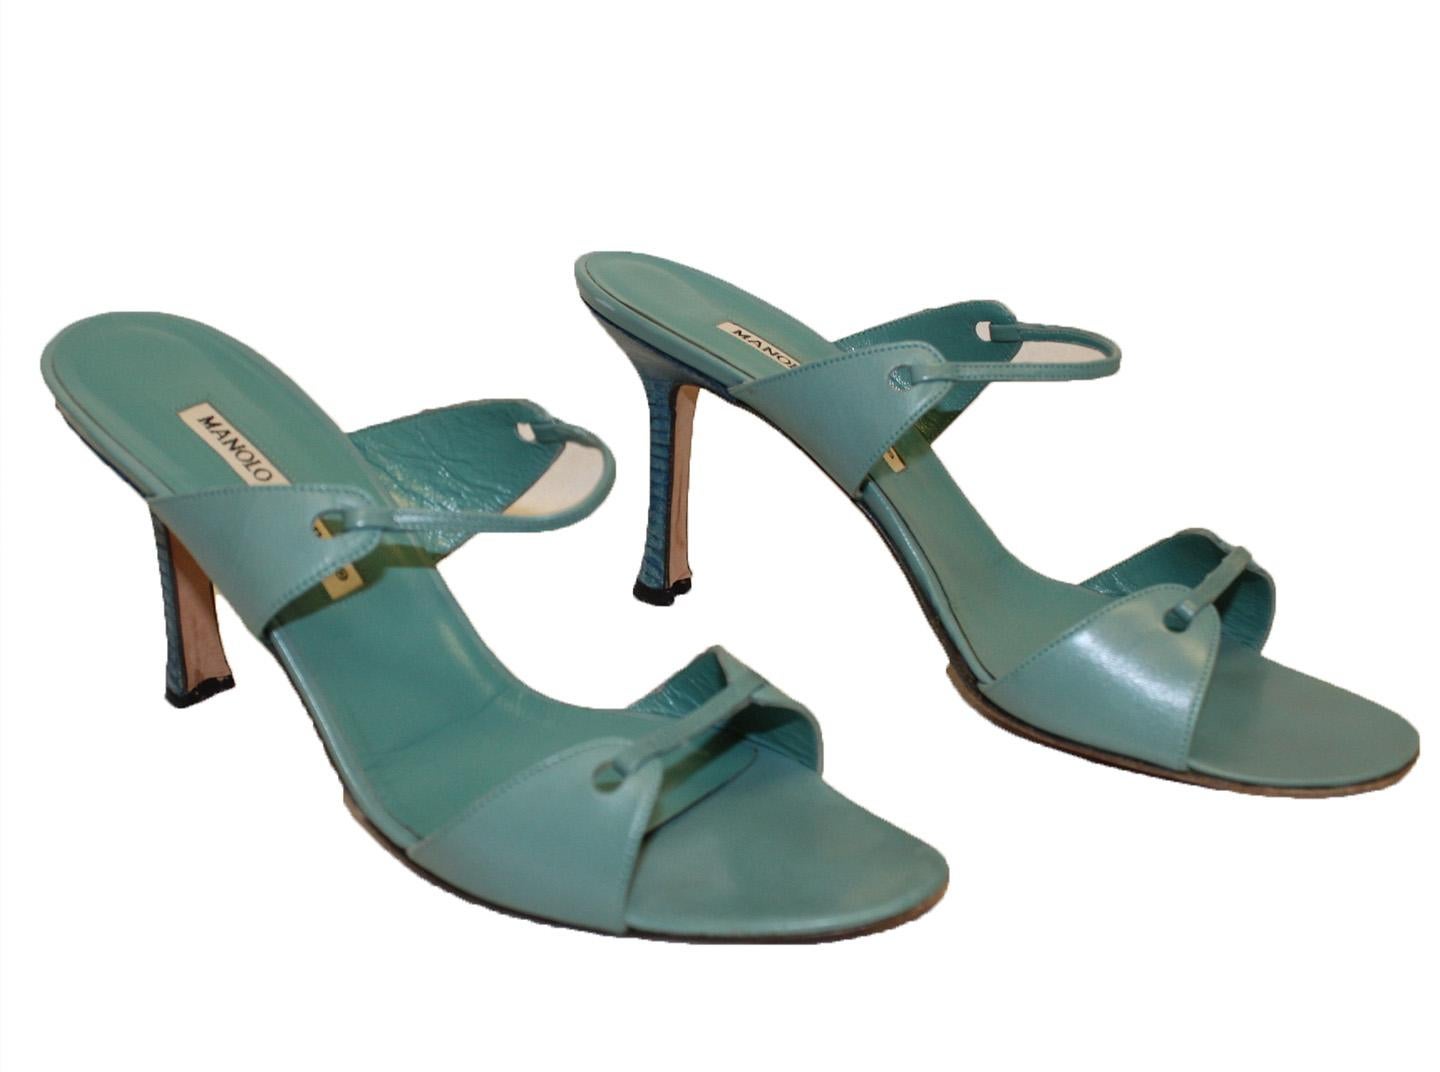 Synonymous with femininity and luxury, iconic Spanish designer Manolo Blahnik exudes a raw elegance that is captured in every footwear silhouette.   These turquoise leather sandals from Manolo Blahnik feature a high stiletto heel, an open back, a